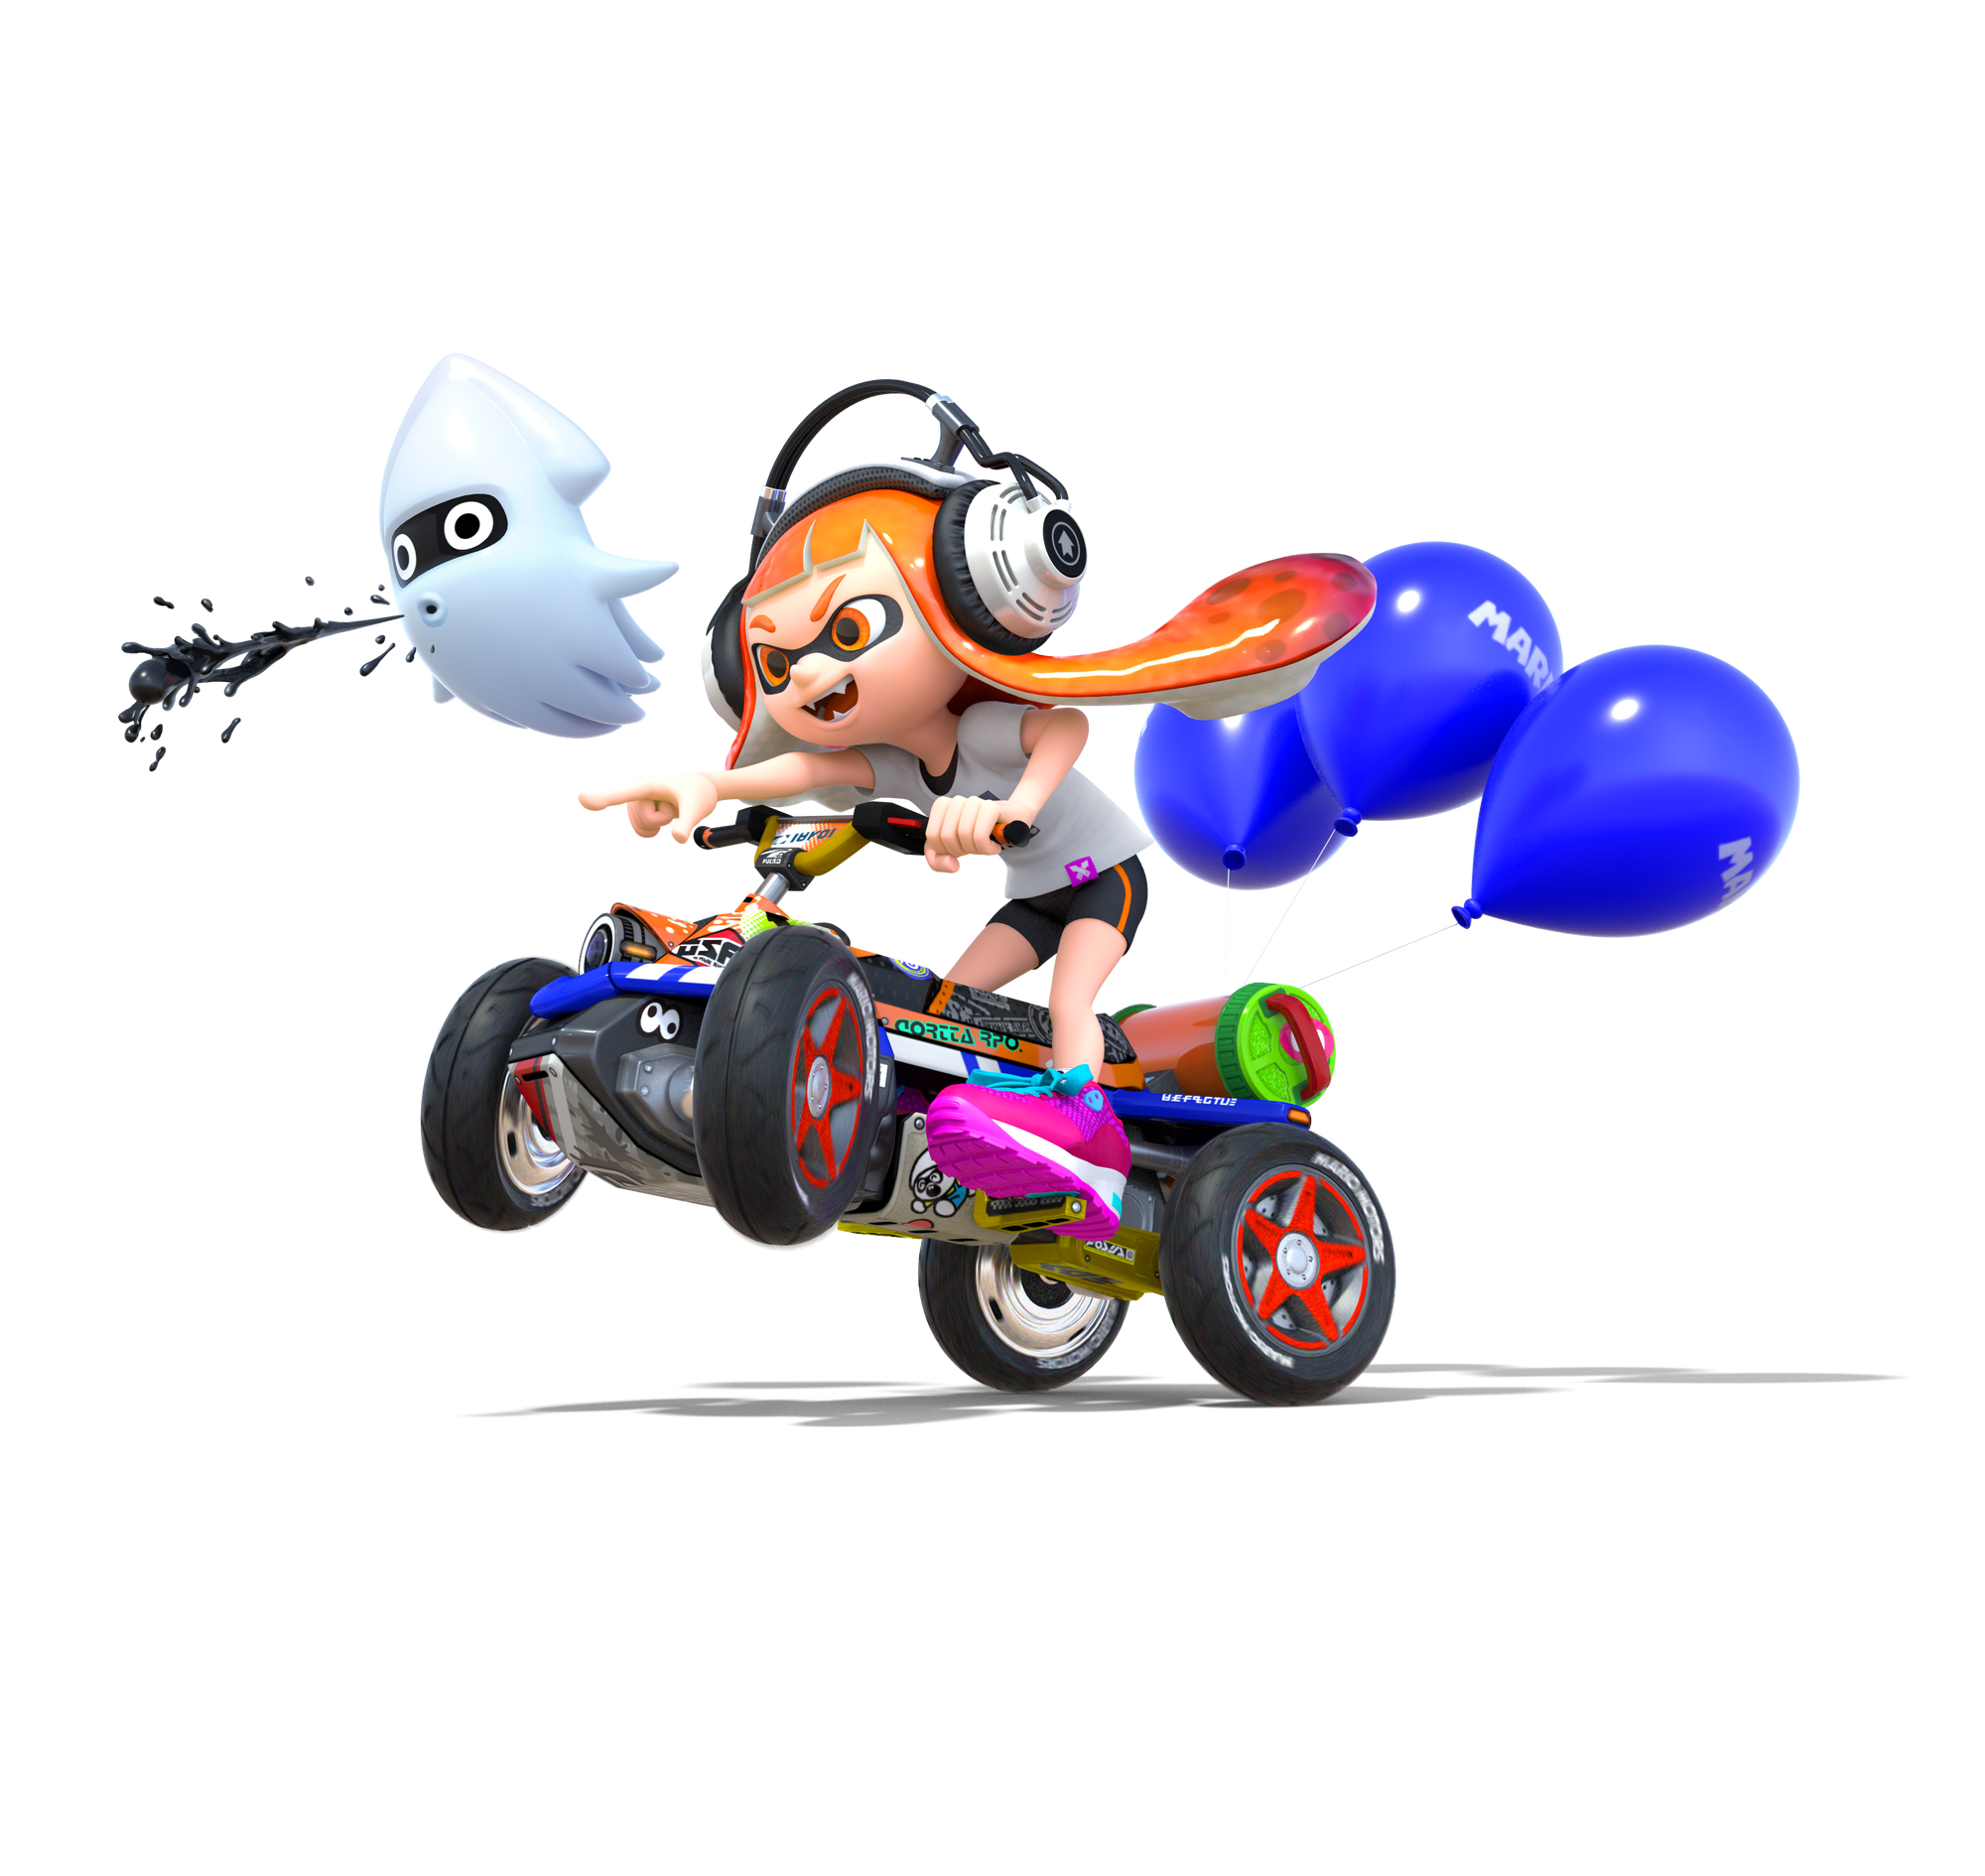 Image Mario Kart 8 Deluxe Character Artwork 04png Nintendo Fandom Powered By Wikia 3511